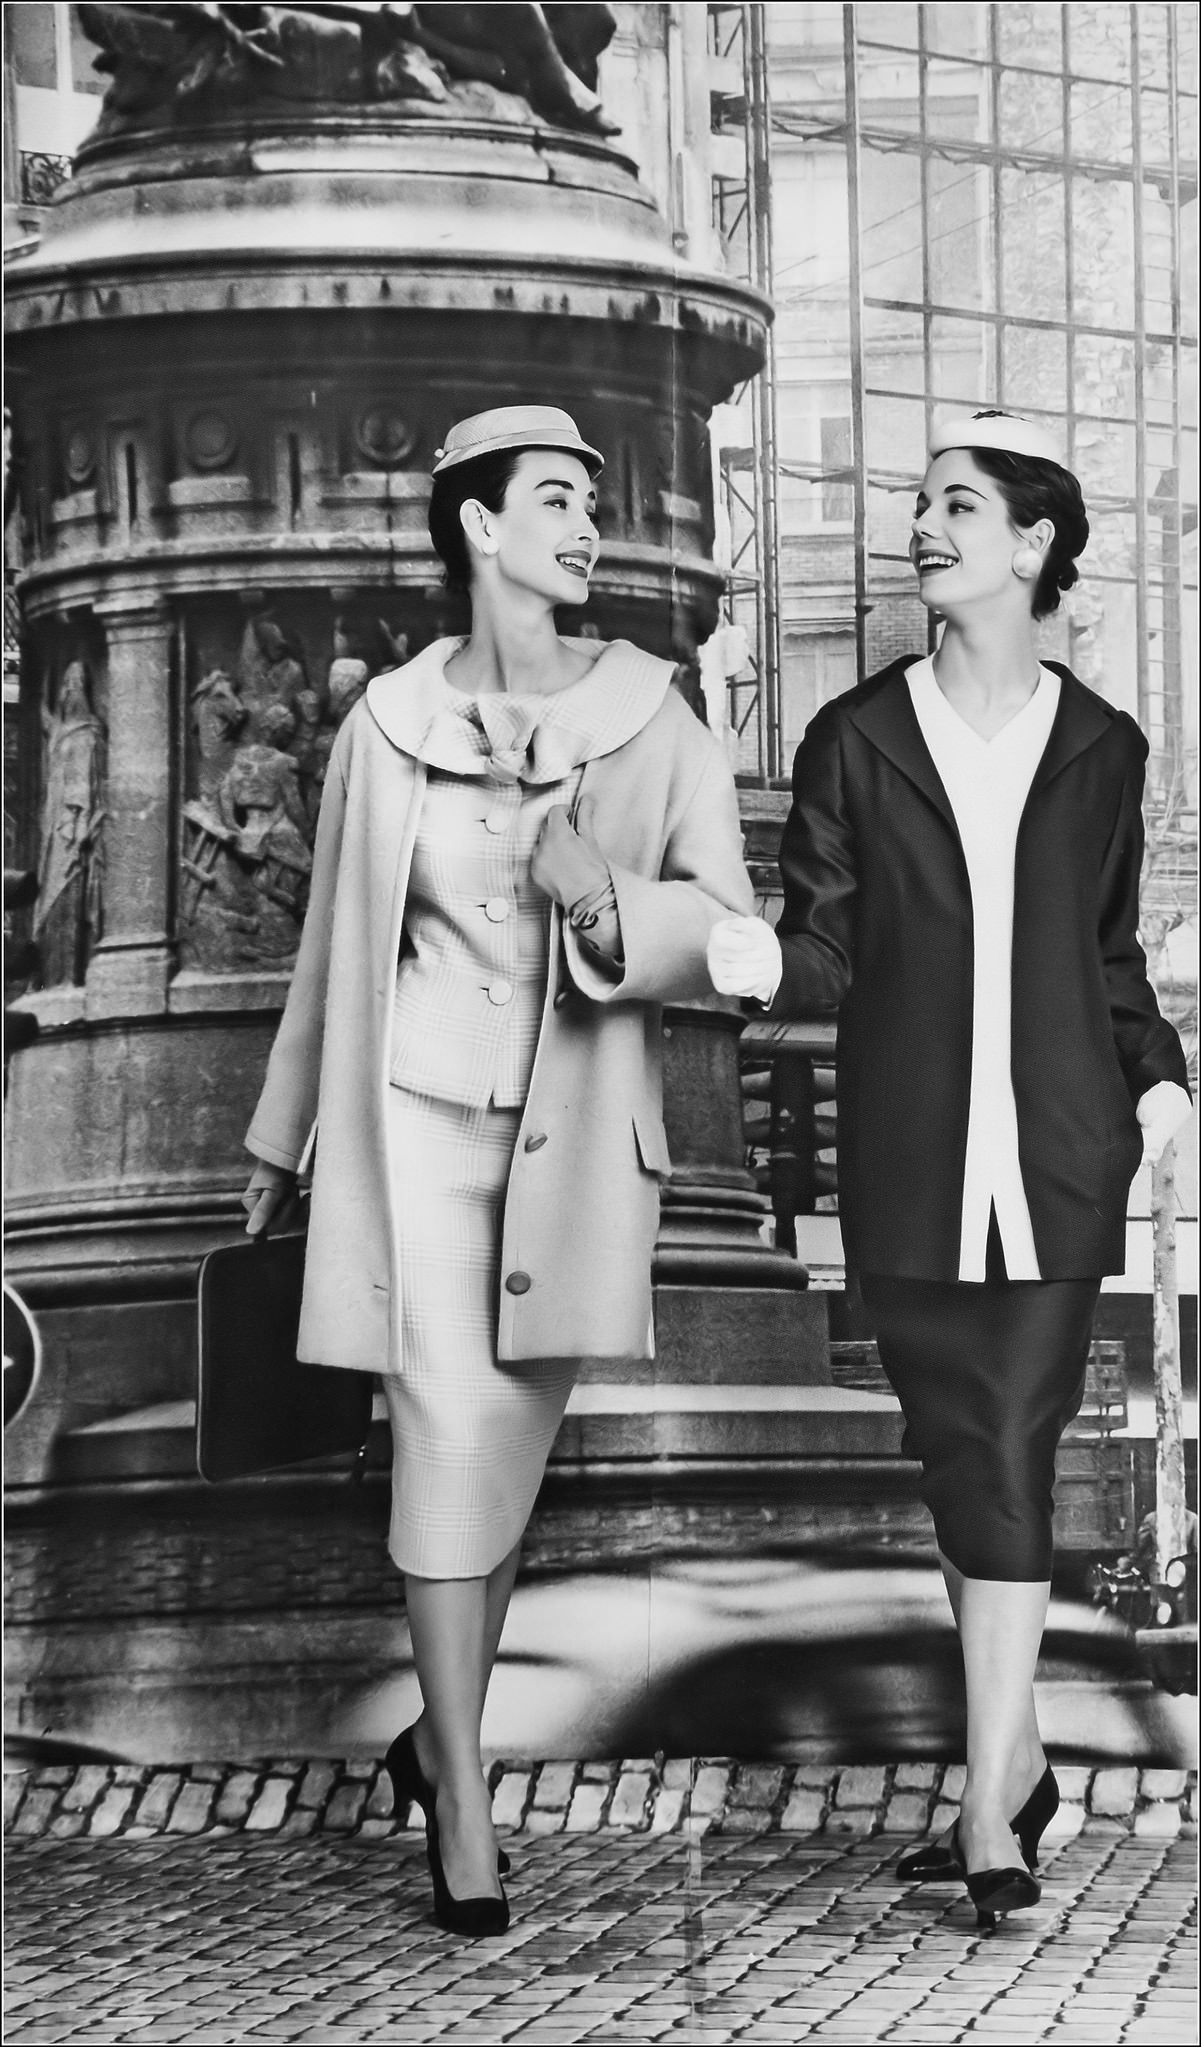 Dorian Leigh and Enid Boulting in ensembles by Givenchy and Lanvin-Castillo, 1955